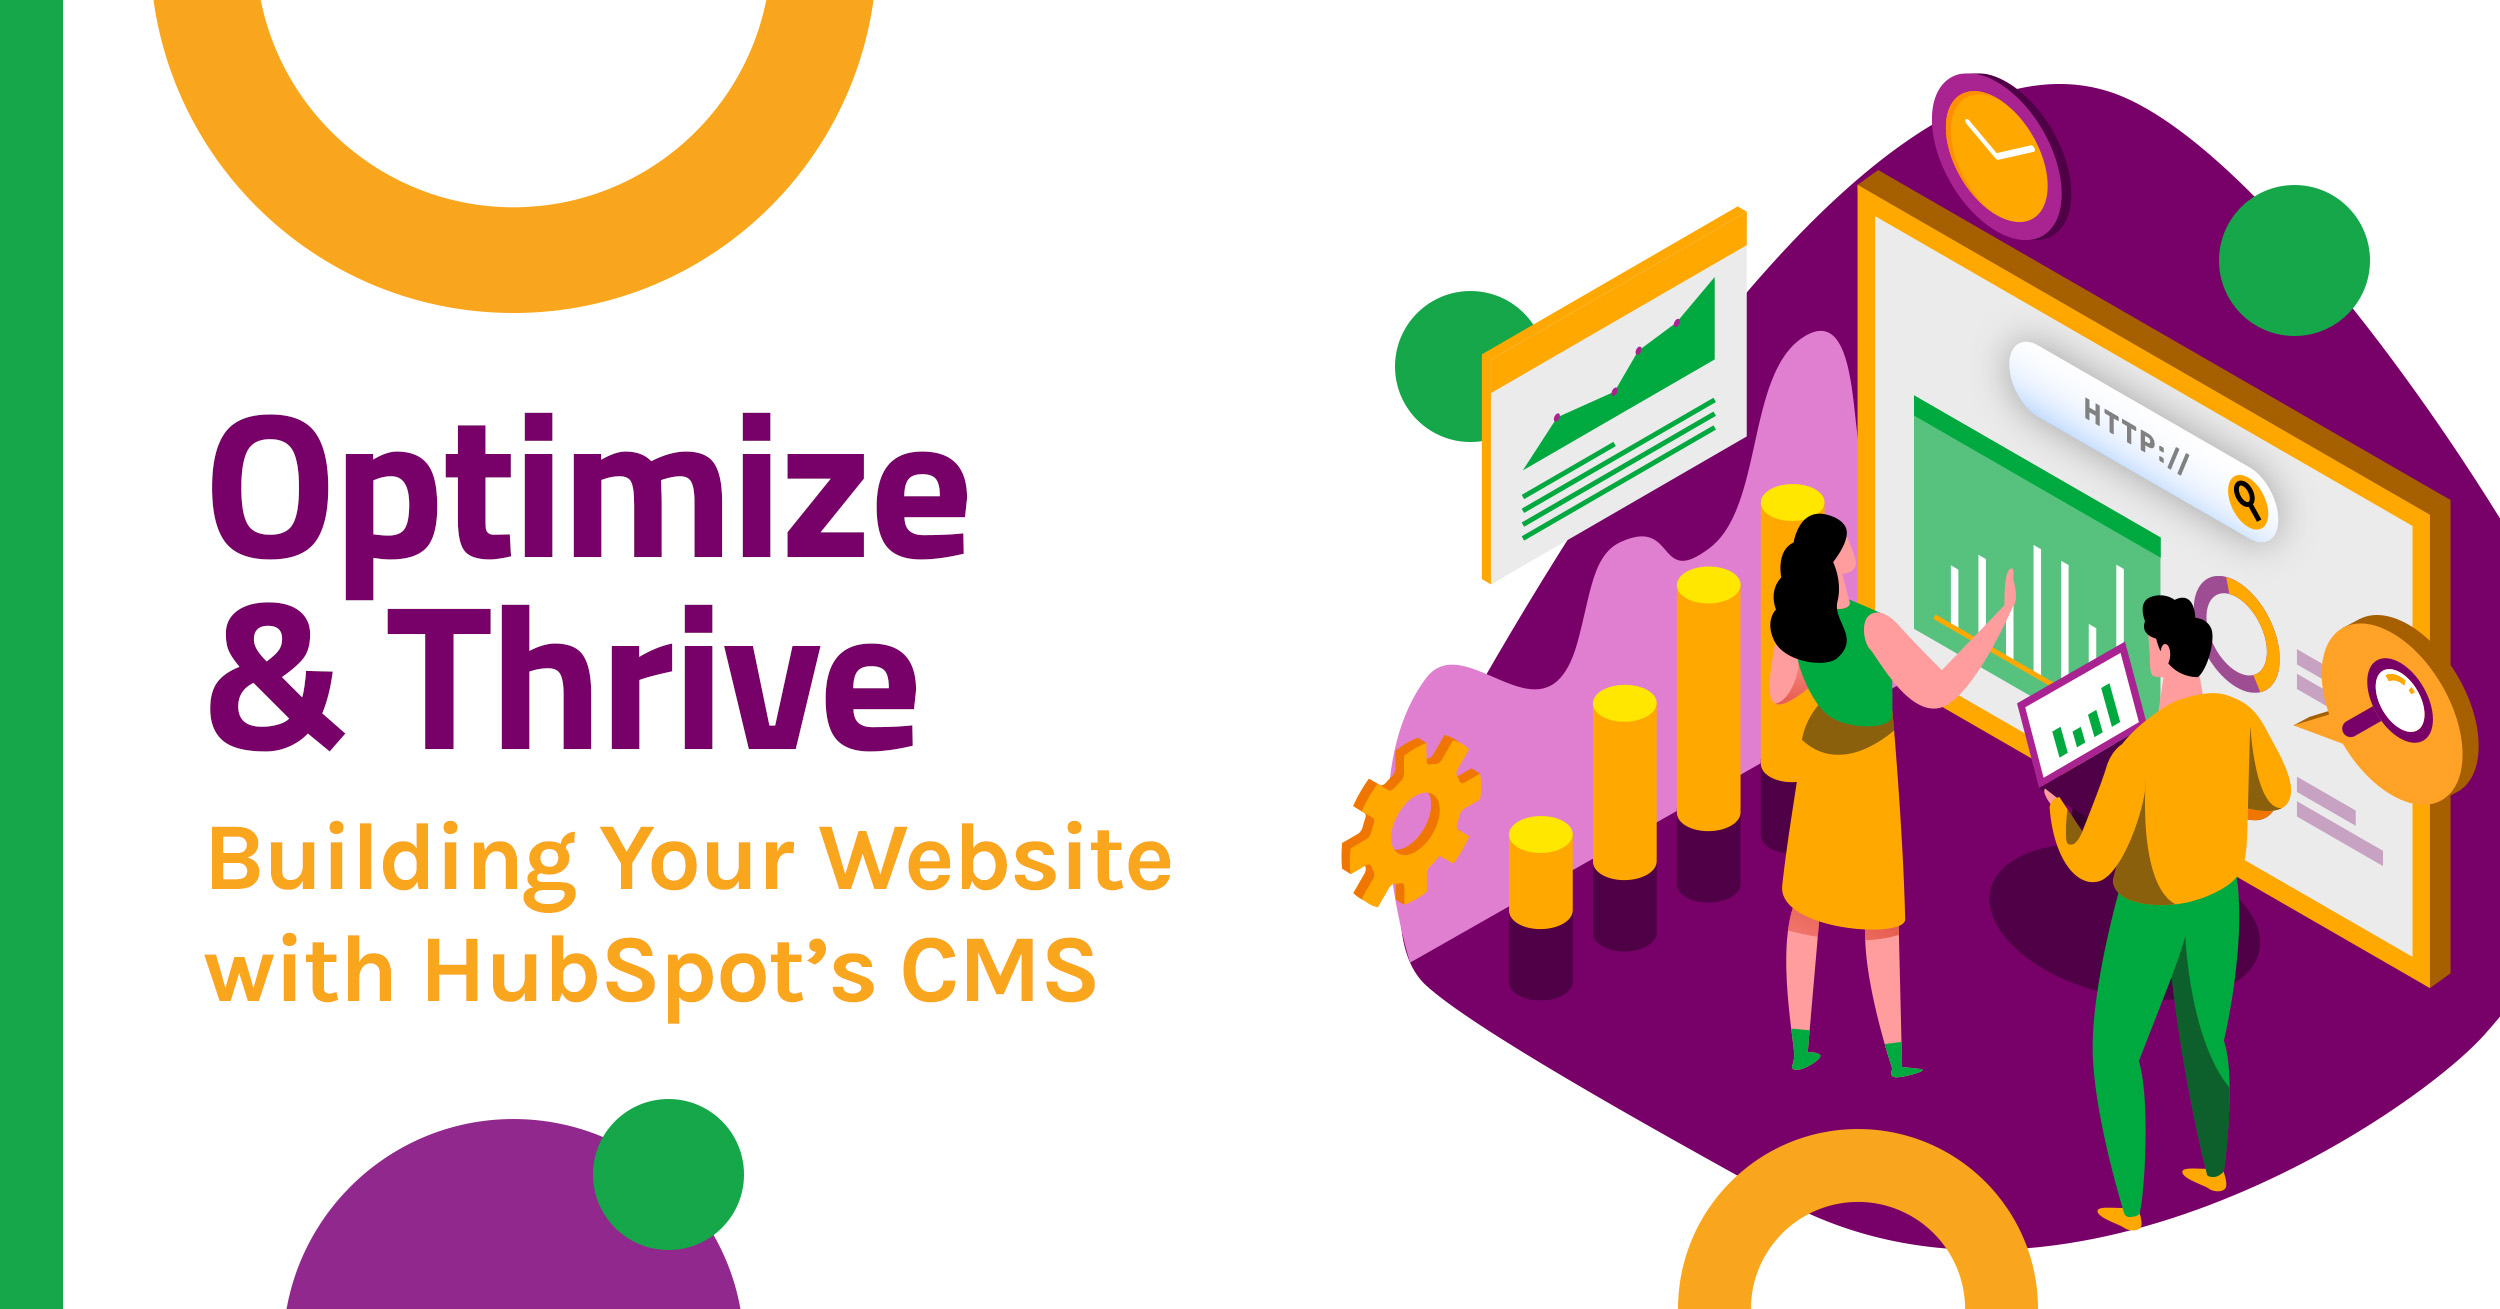 Optimize & Thrive: Building Your Website with HubSpot’s CMS